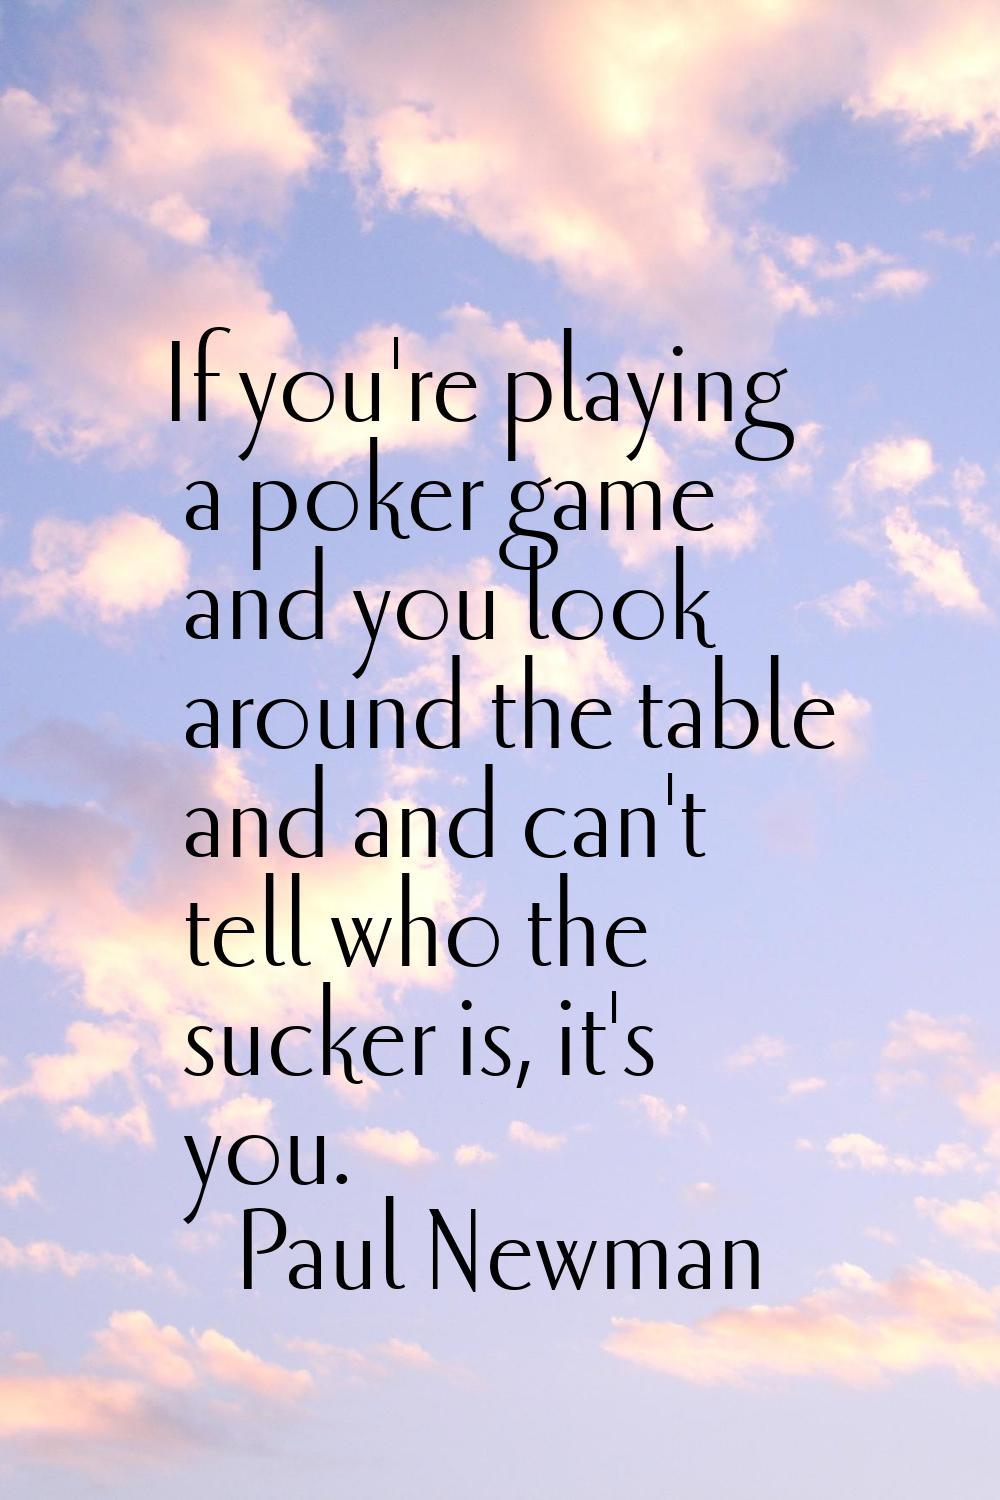 If you're playing a poker game and you look around the table and and can't tell who the sucker is, 